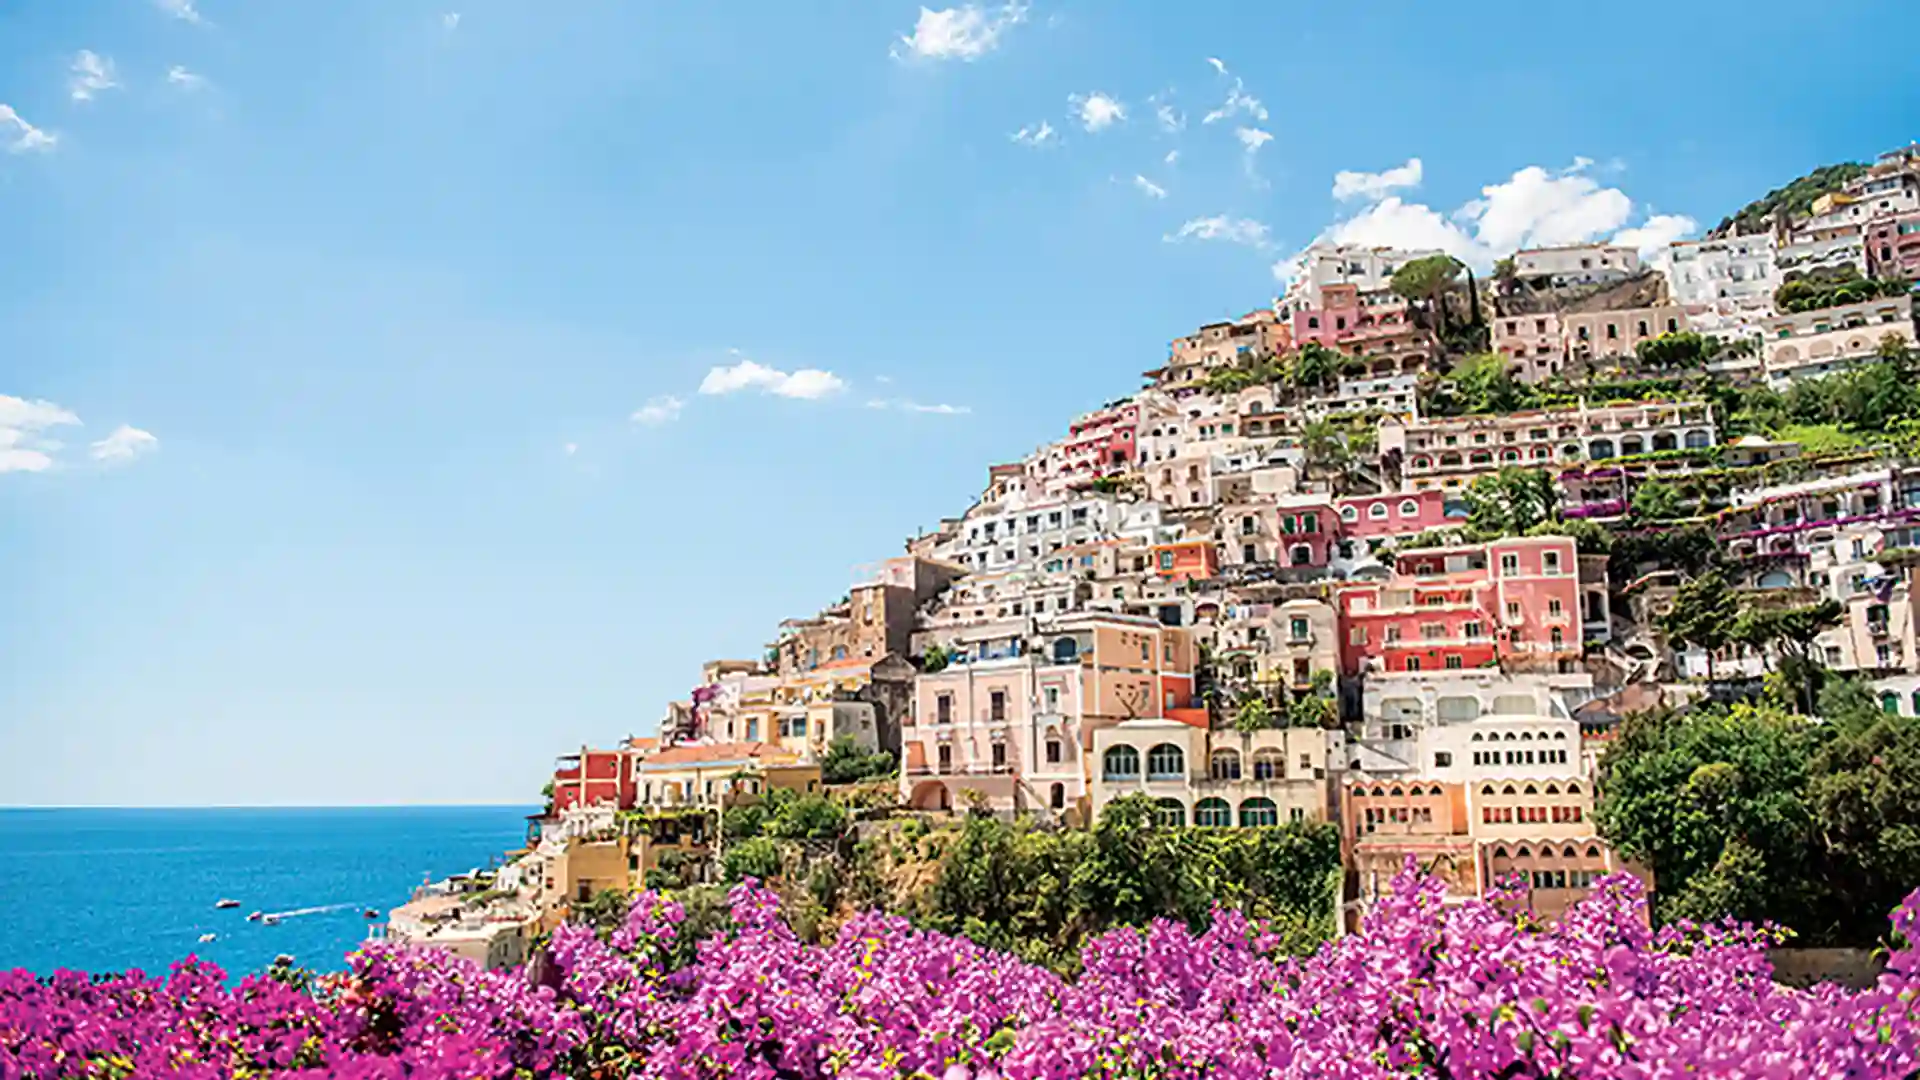 View of hillside buildings and flowers along Amalfi Coast in Italy.